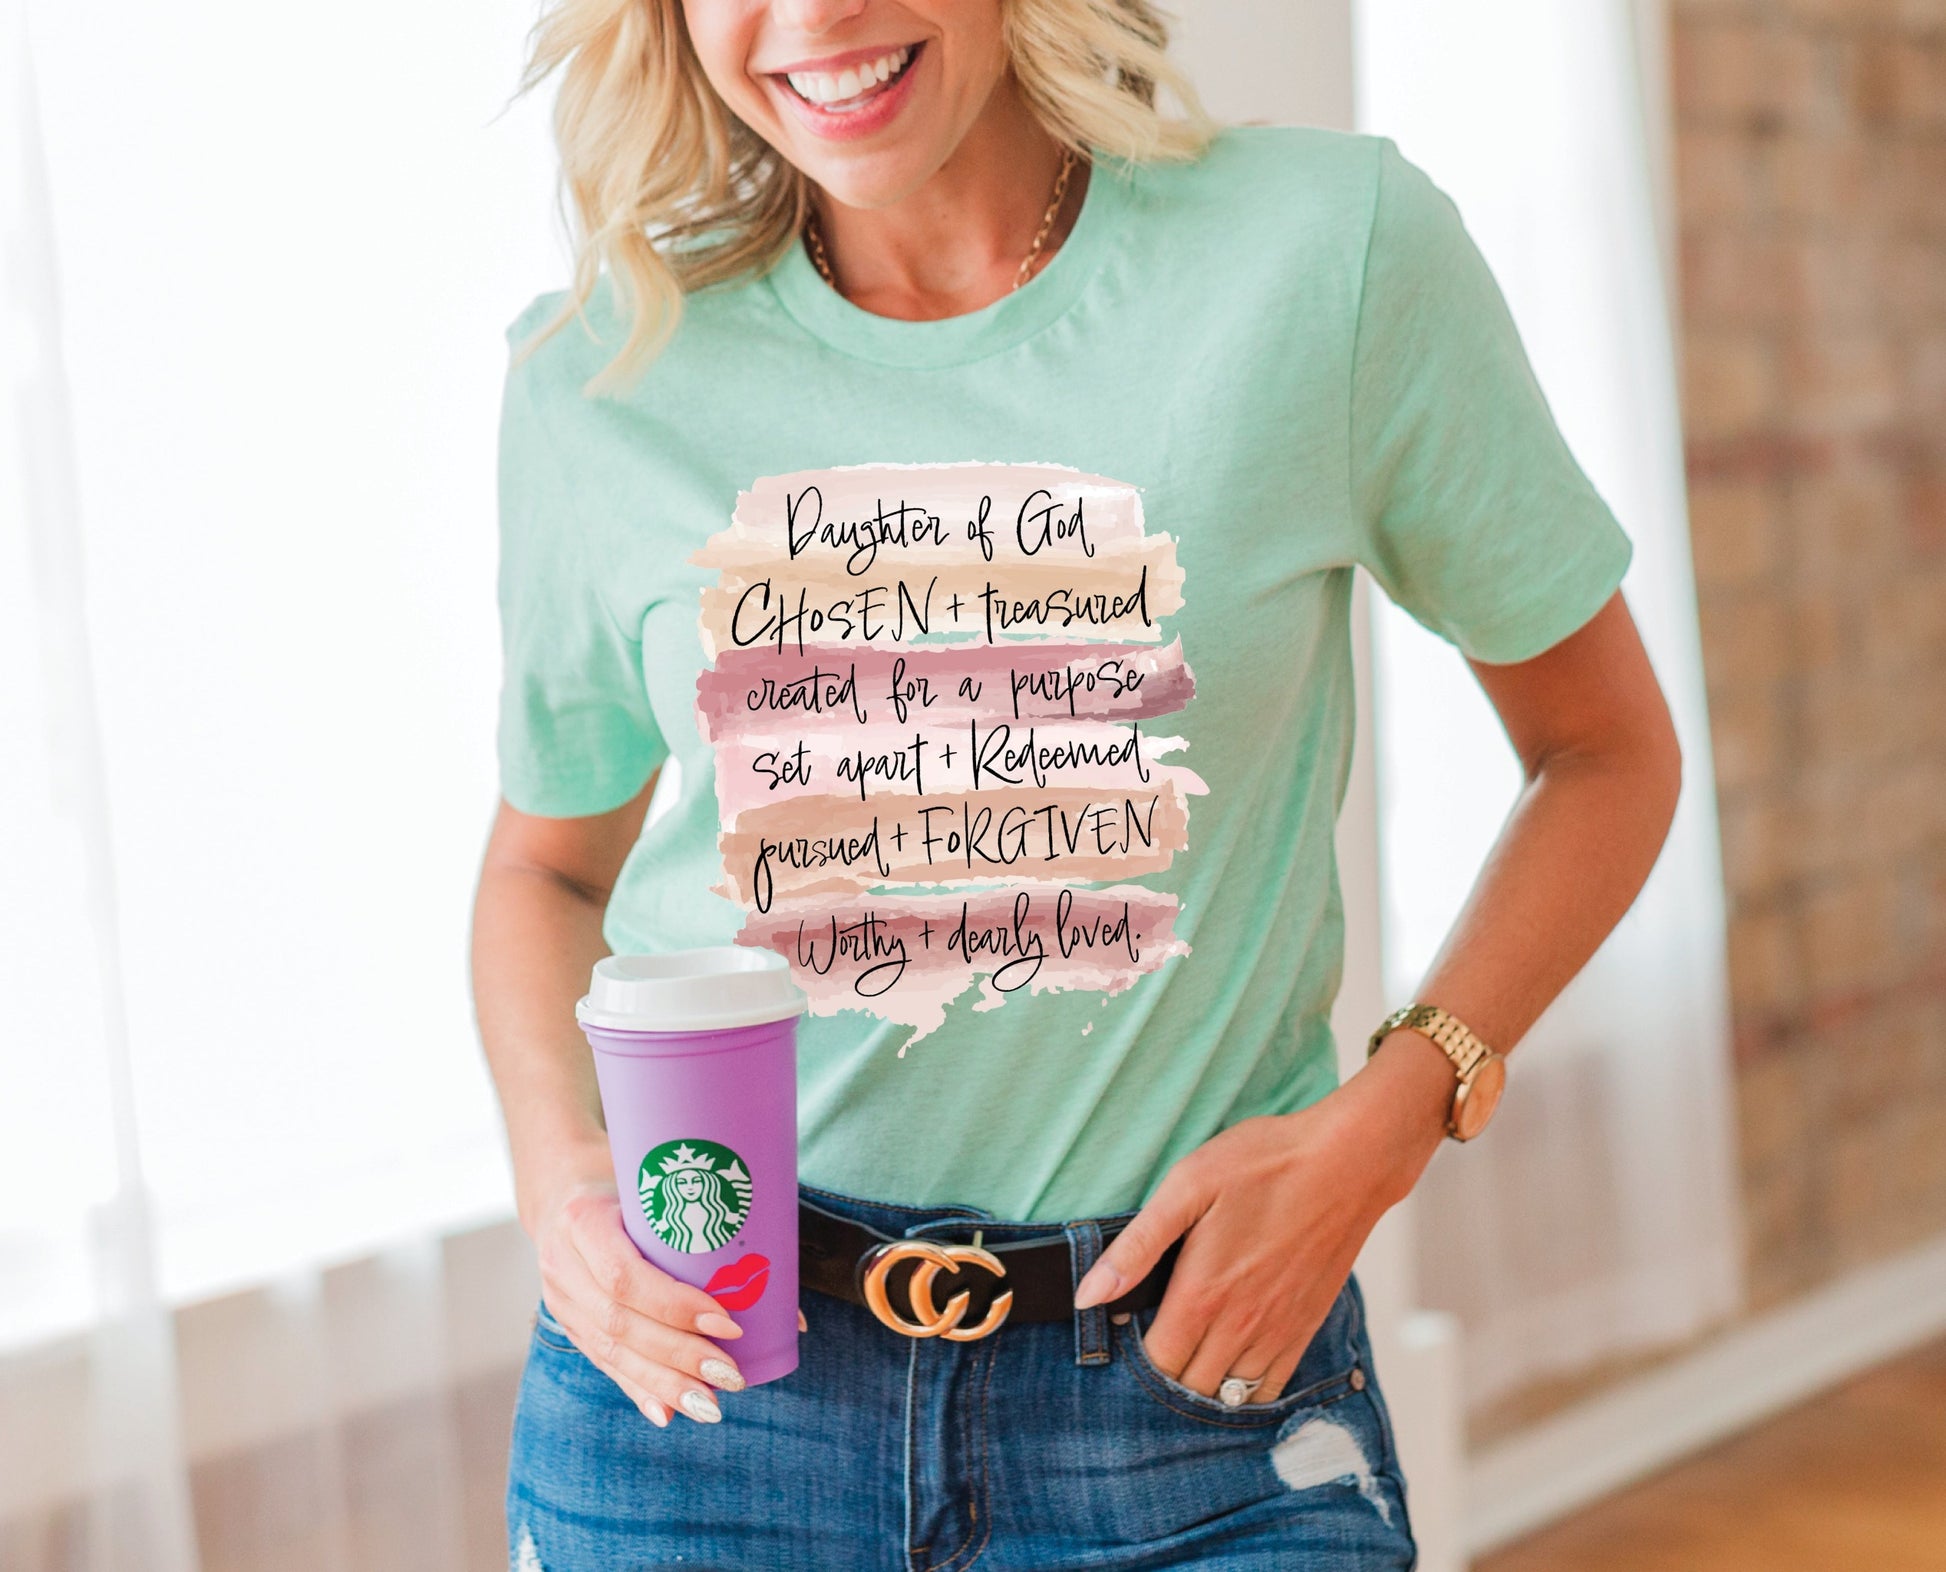 Daughter of God, Chosen, created for a purpose, redeemed, forgiven, worthy, loved, Christian woman aesthetic with neutral colors watercolor splash background printed on soft heather prism mint green unisex t-shirt for women